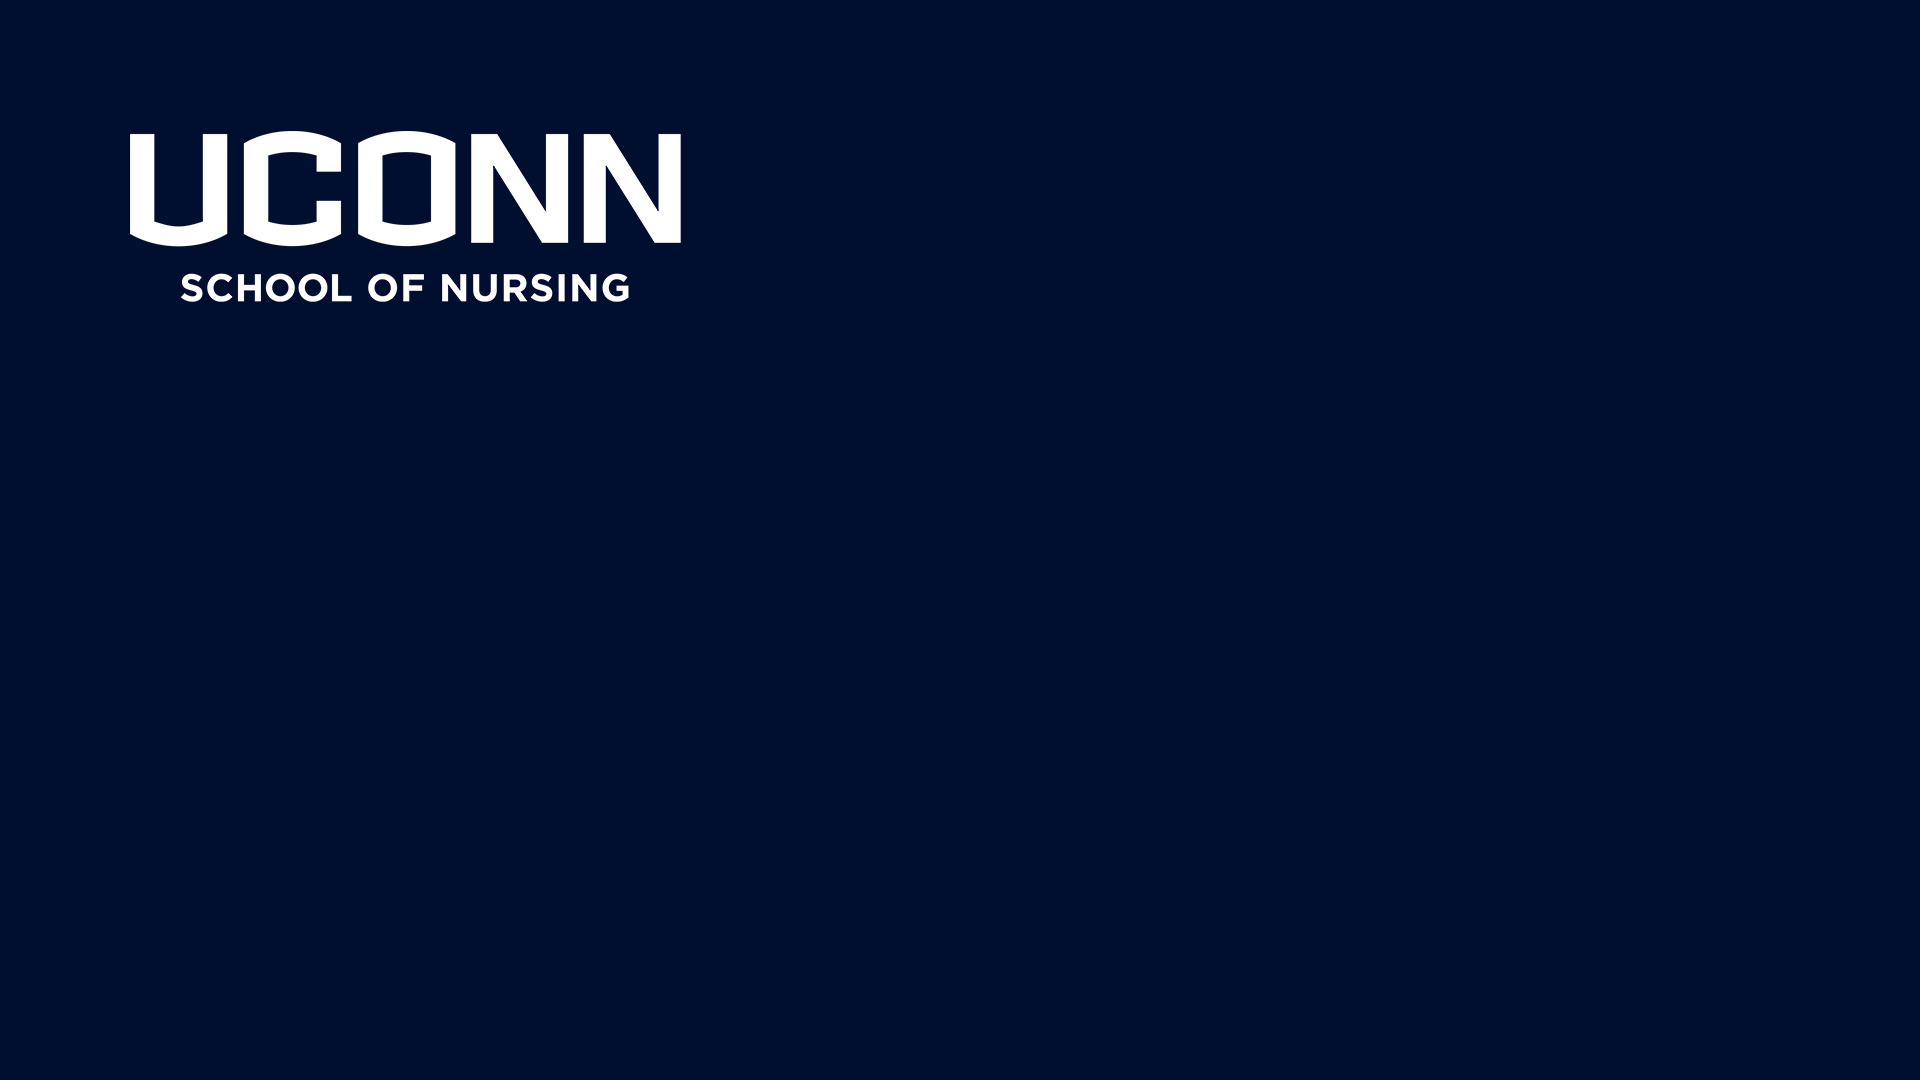 A navy blue background with the School of Nursing wordmark in the top left corner